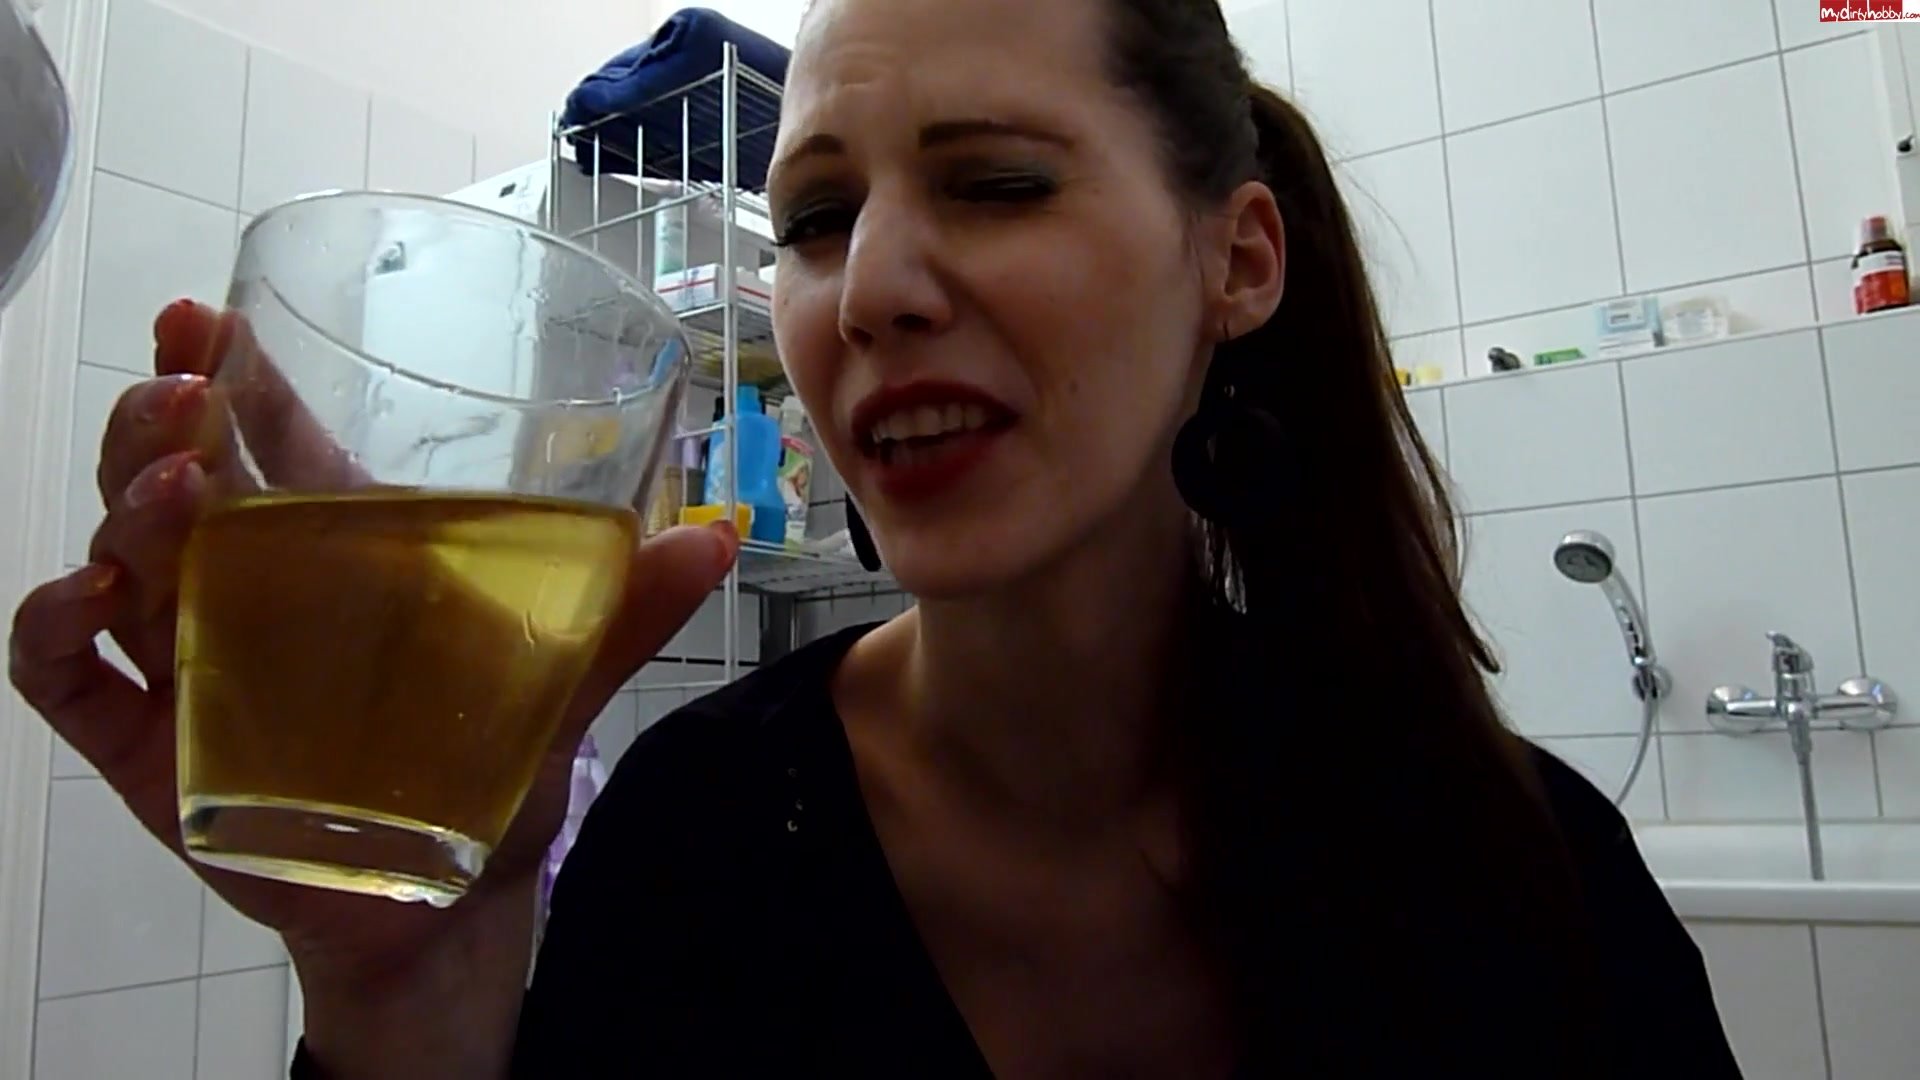 Piss whore drinks 6 glasses of her own pee